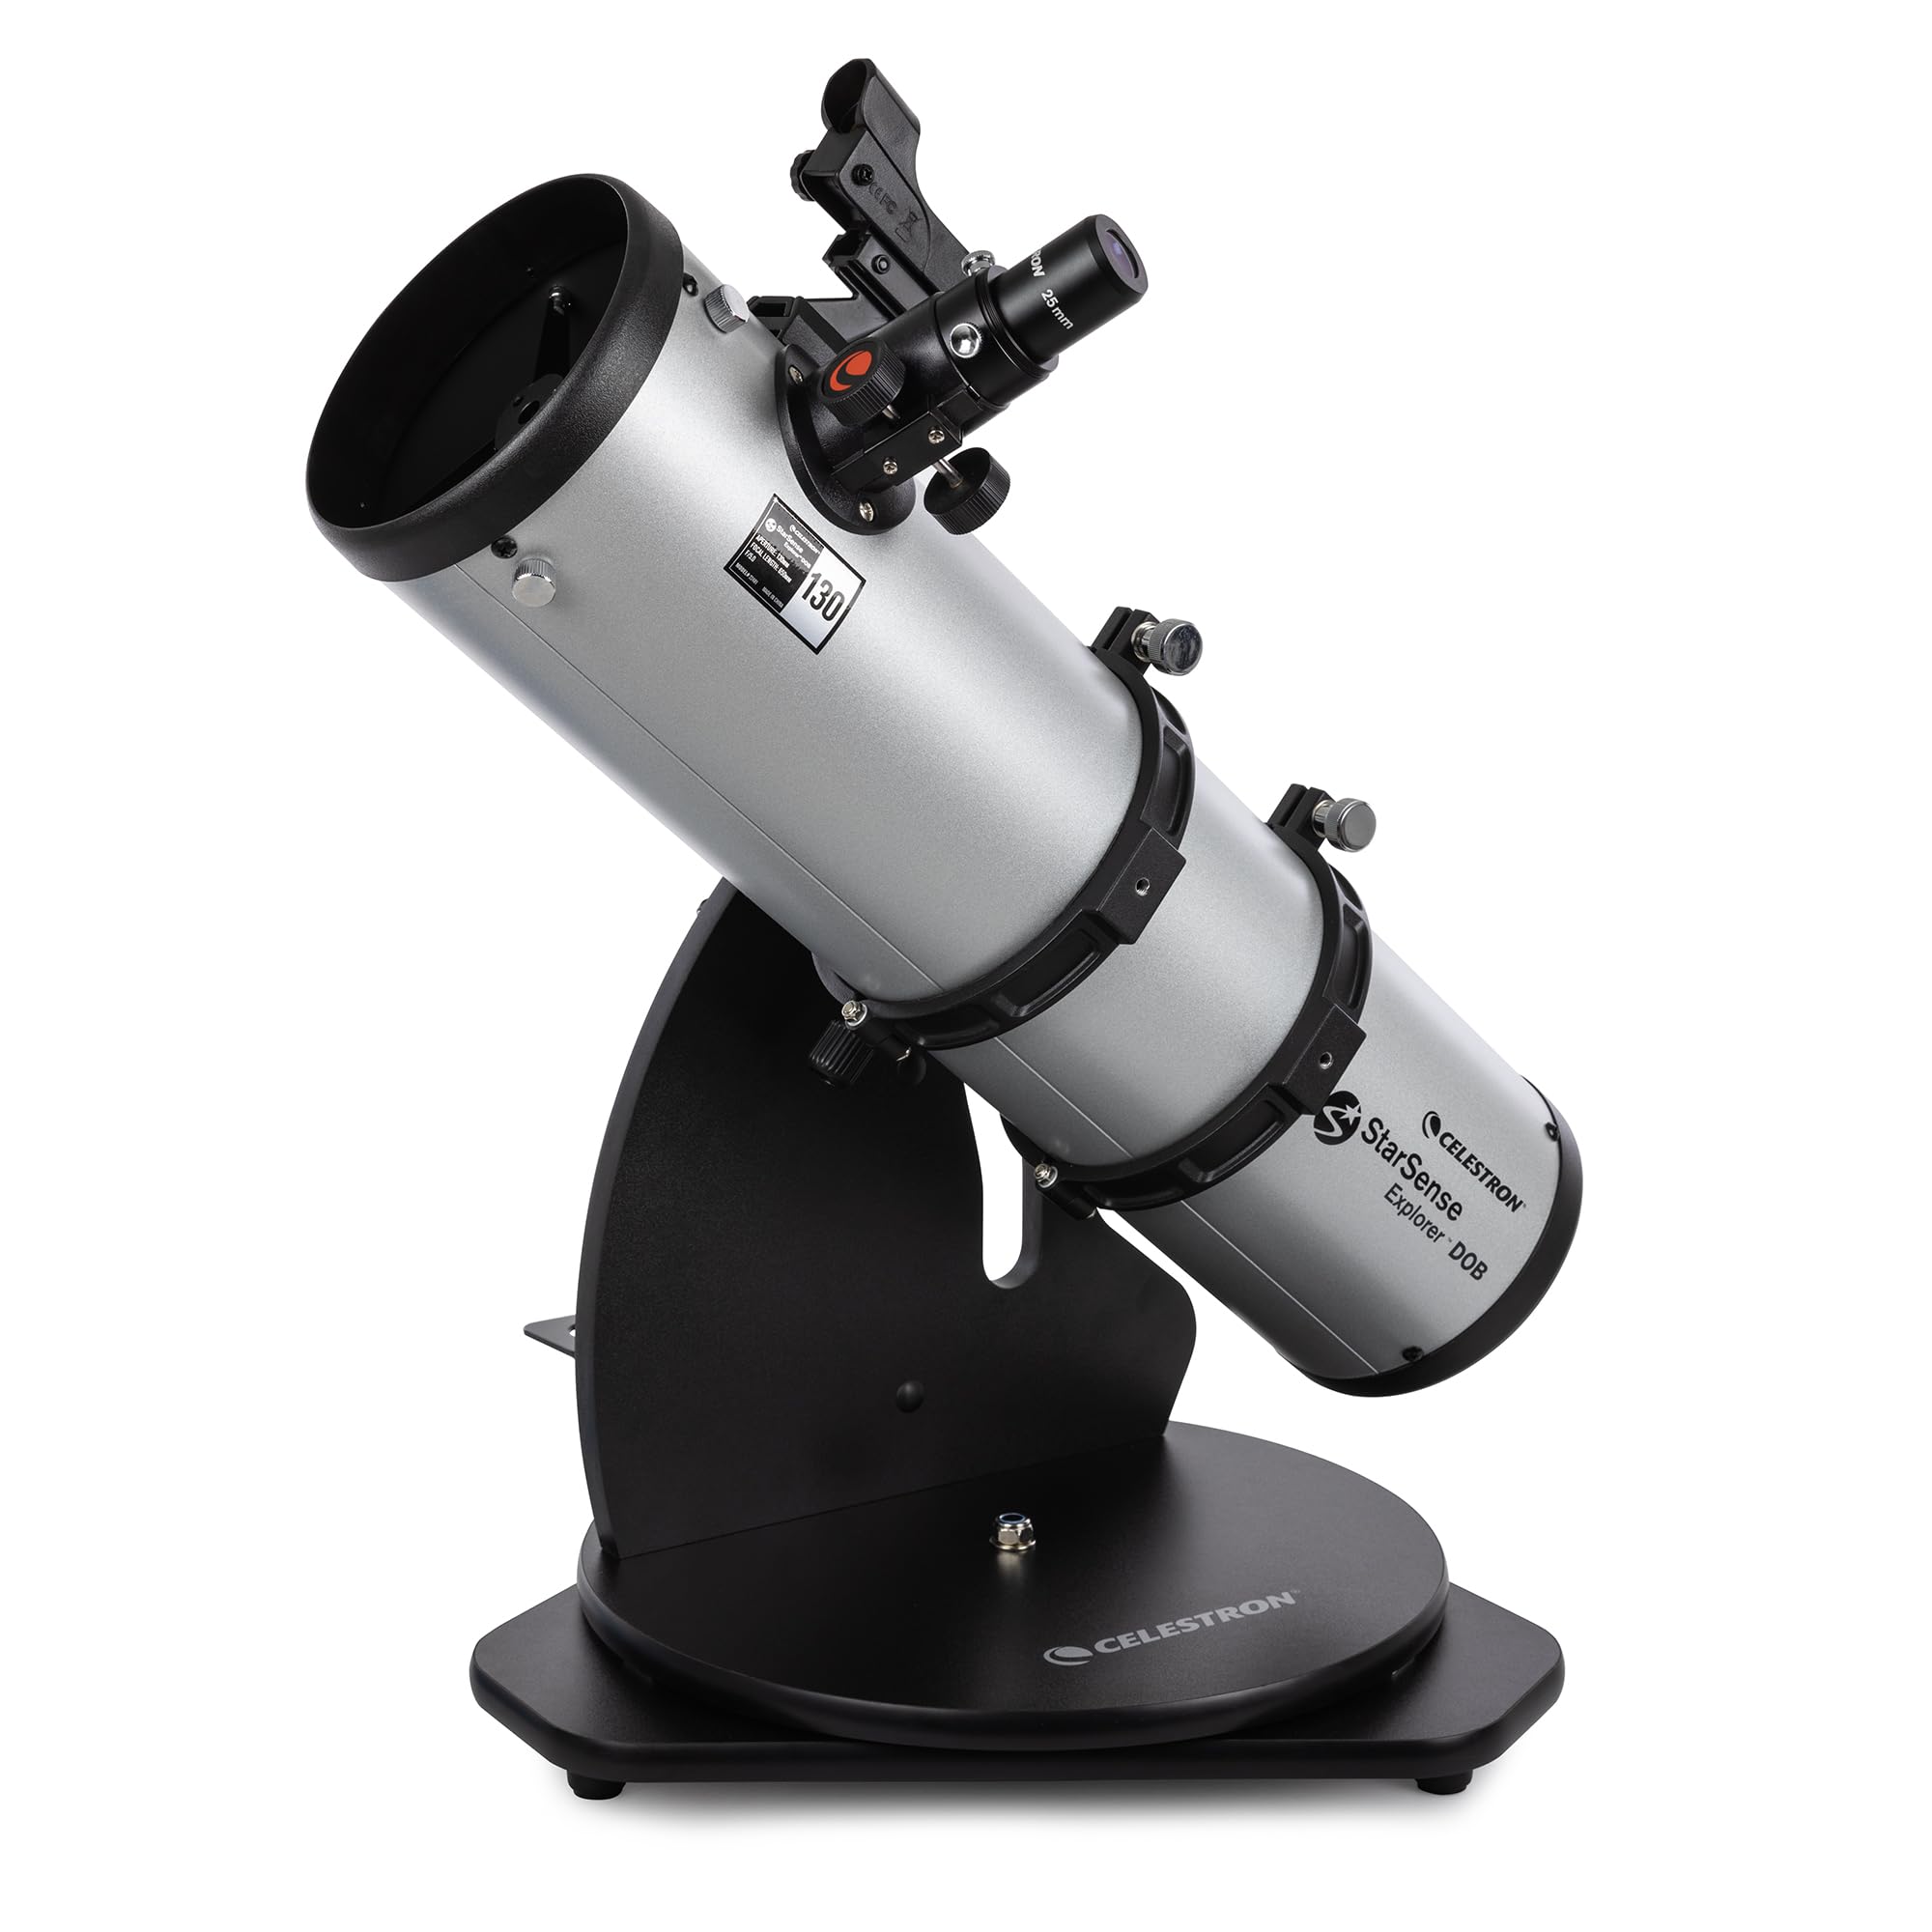 Celestron – StarSense Explorer 130mm Tabletop Dobsonian Smartphone App-Enabled Telescope – Works with StarSense App to Help You Find Nebulae, Planets & More – iPhone/Android Compatible